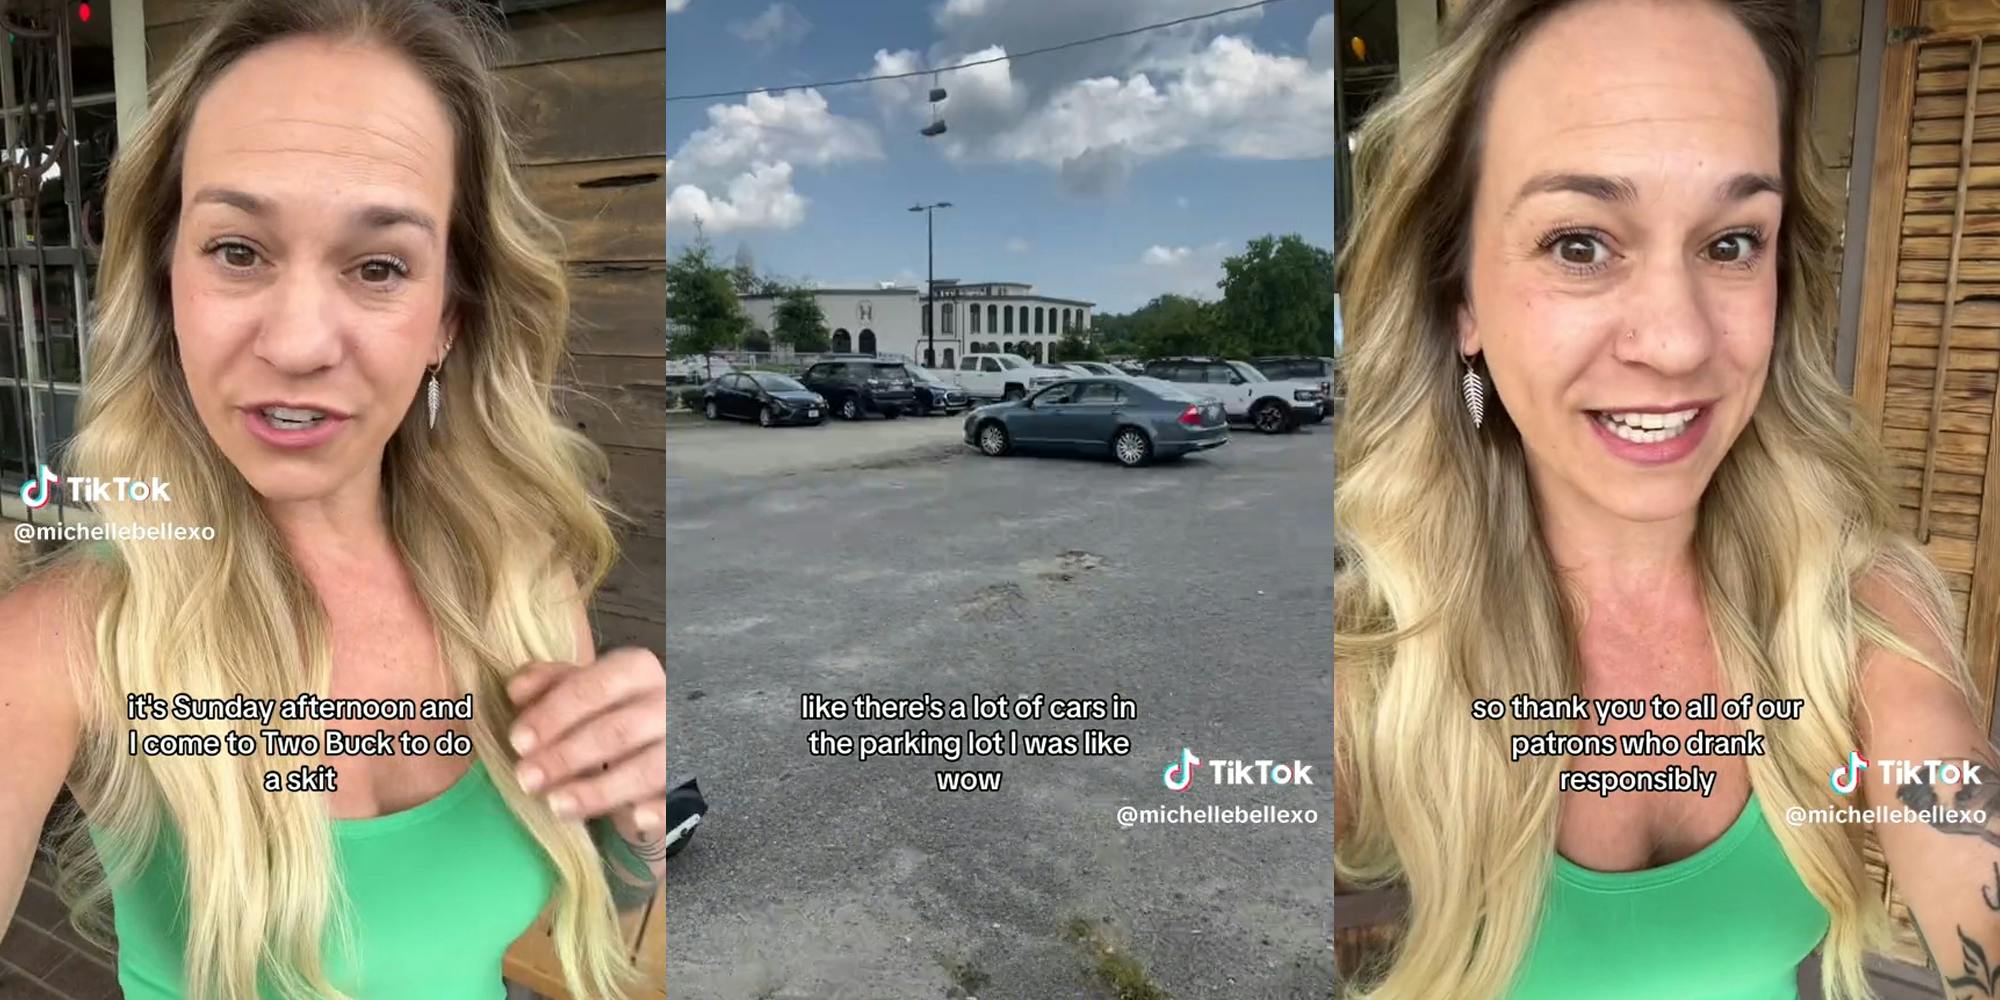 woman with caption "it's Sunday afternoon and I come to Two Buck to do a skit" (l) cars in parking lot with caption "like there's a lot of cars in the parking lot i was like wow" (c) woman with caption "so thank you to all of our patrons who drank responsibly" (r)